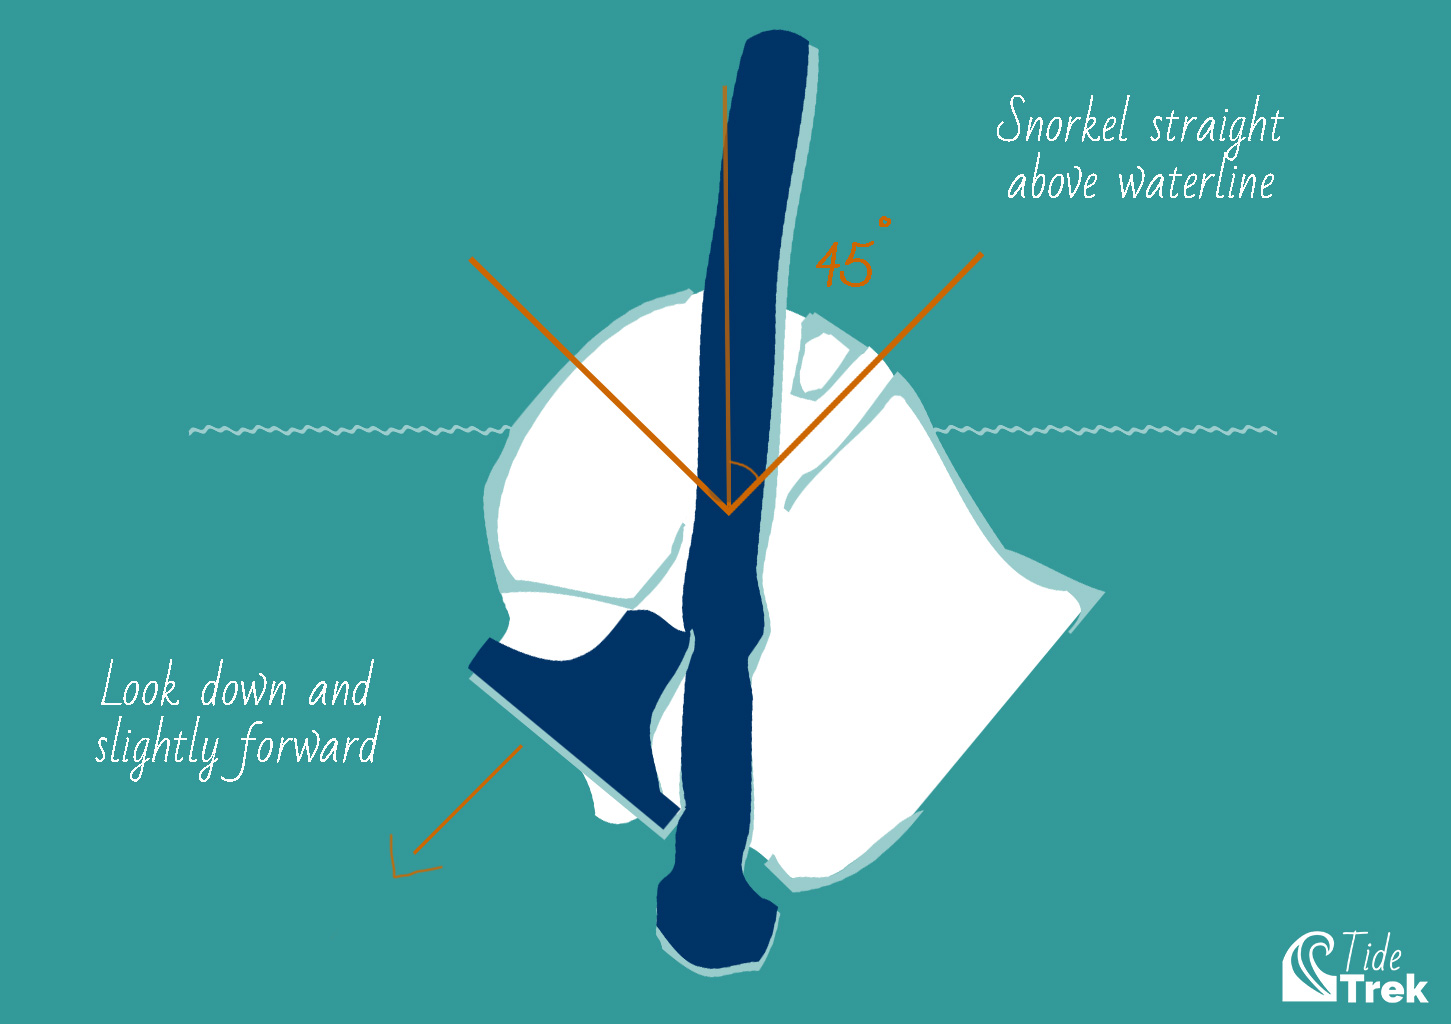 Snorkeling: How to position the snorkel for breathing above the waterline